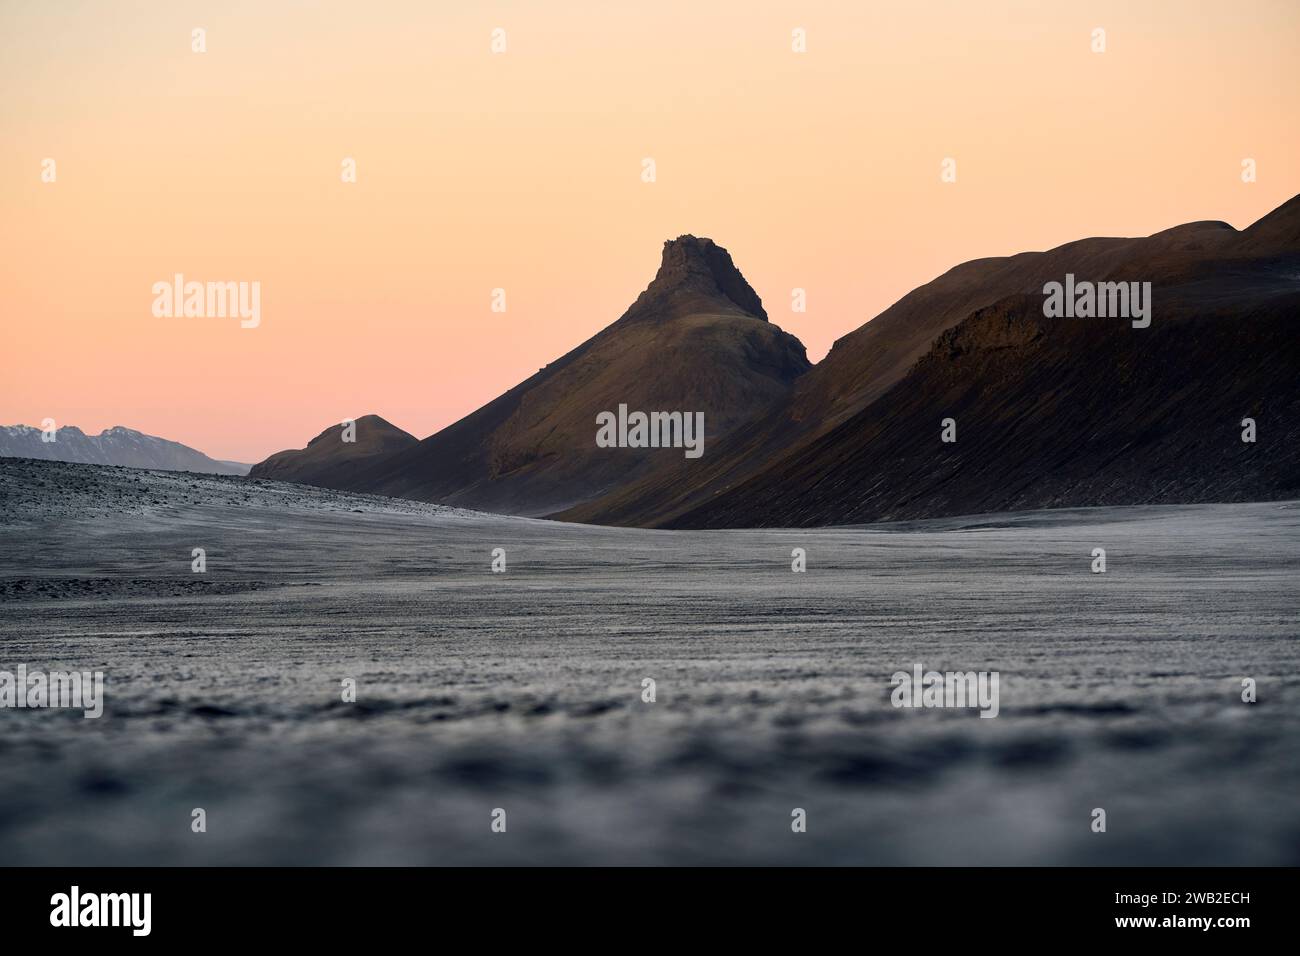 Mountains with snowy surface in Iceland Stock Photo